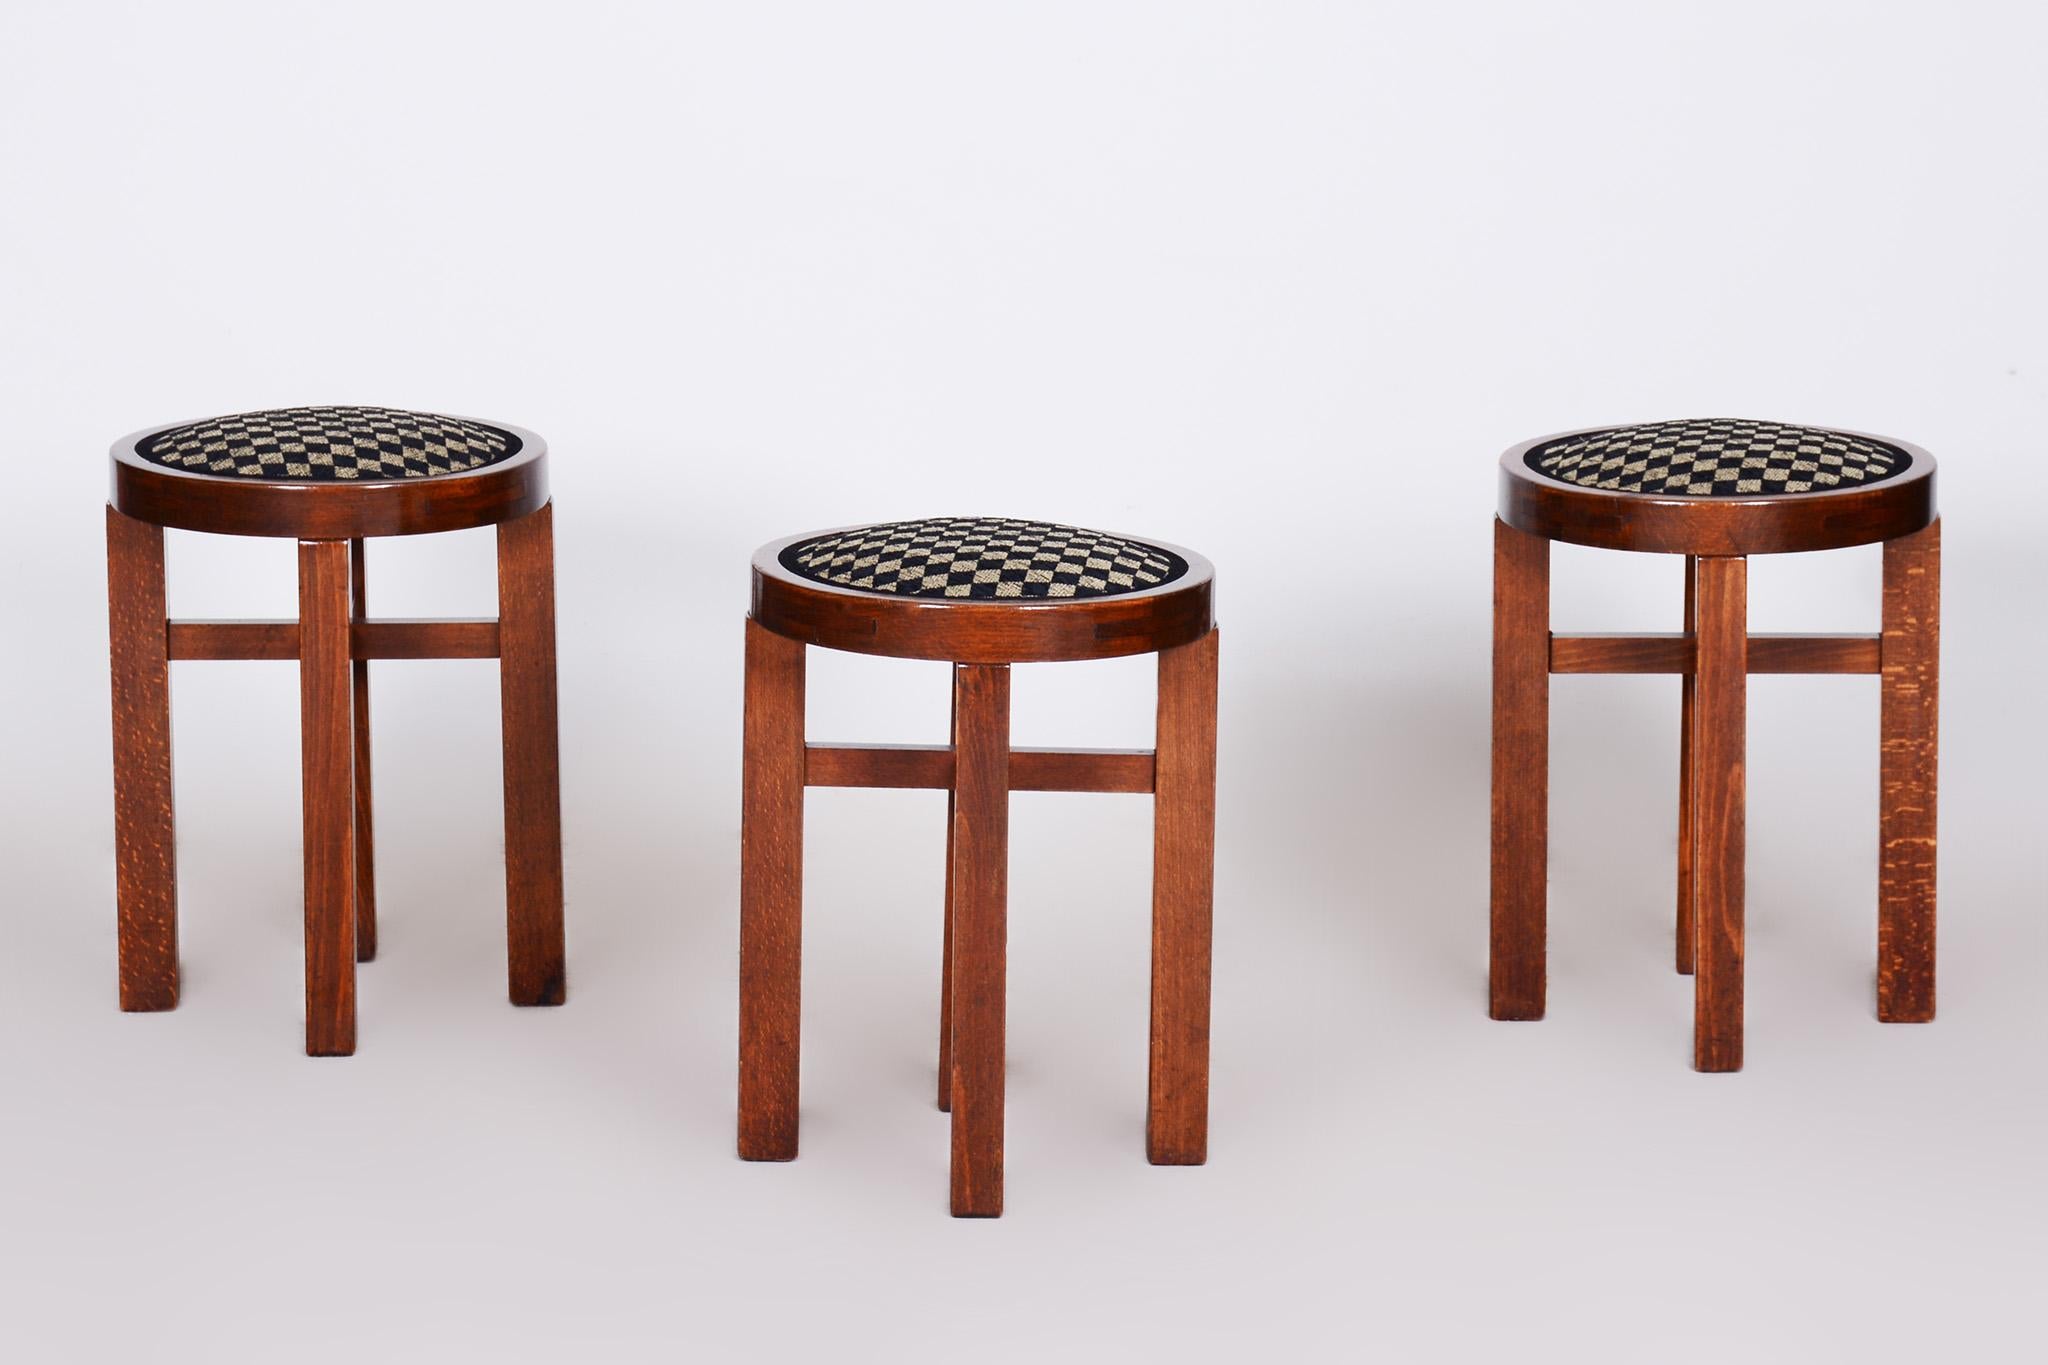 Set of 3 ArtDeco Foot Stools Made in´20s Czechia, New upholstery, Revived polish In Good Condition For Sale In Horomerice, CZ